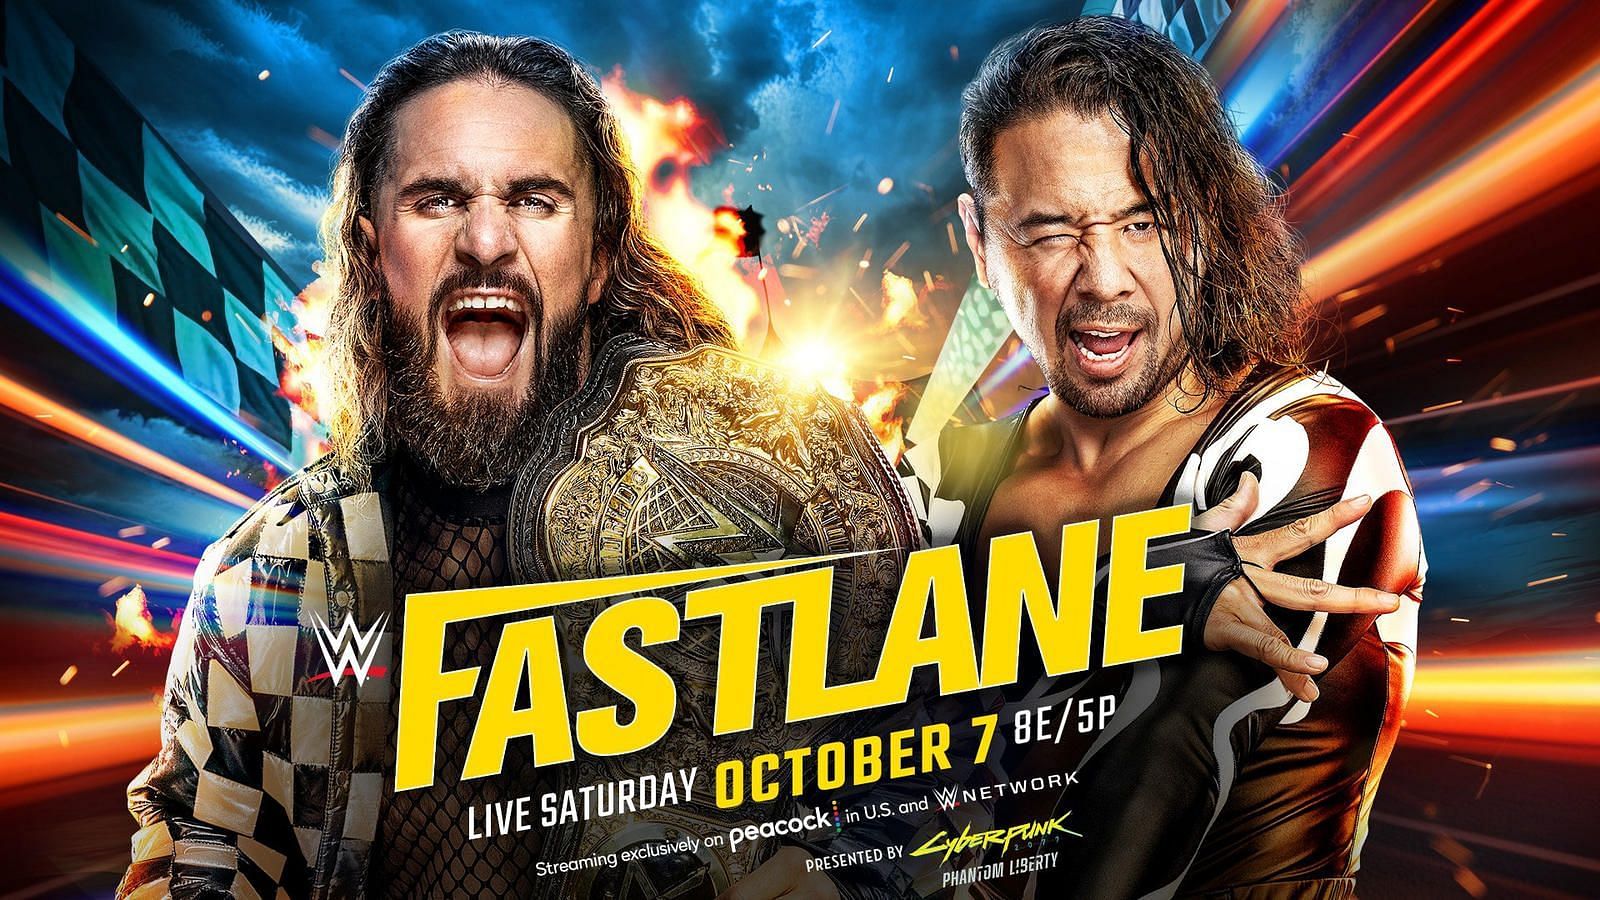 A Last Man Standing match at WWE Fastlane may be Seth Rollins